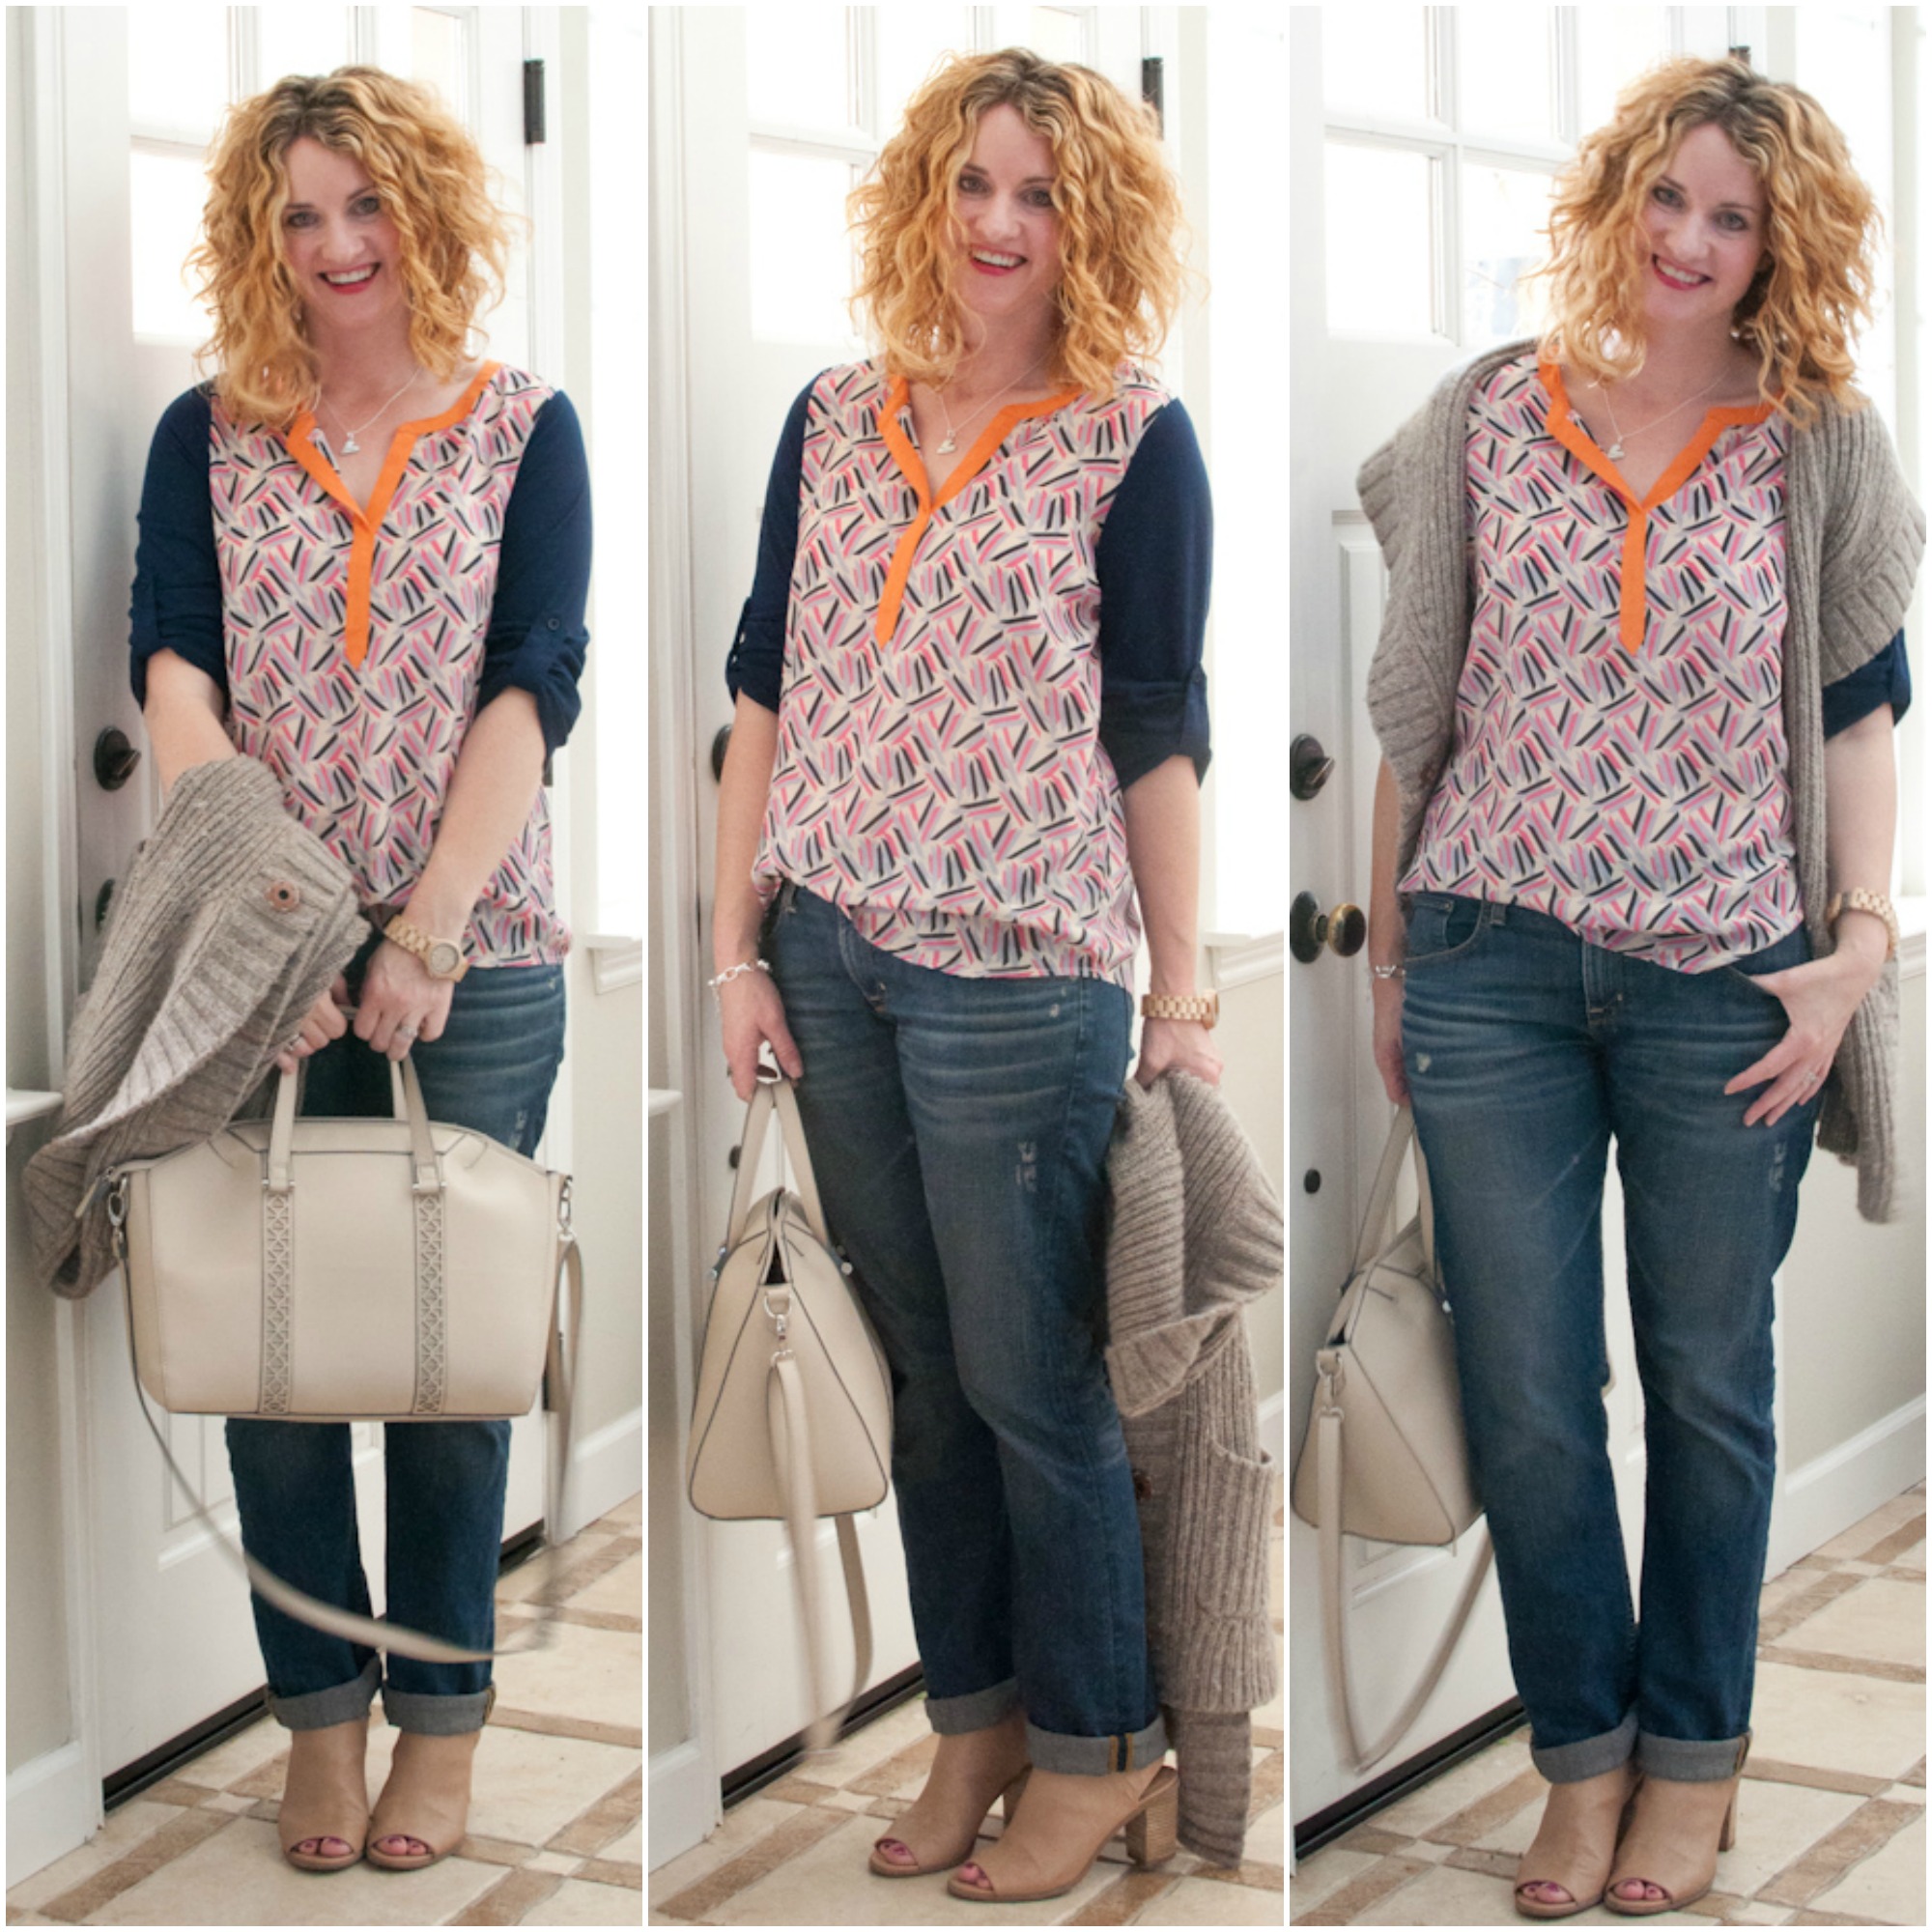 4 quick tips about outfit {new stitch fix box arrived!}